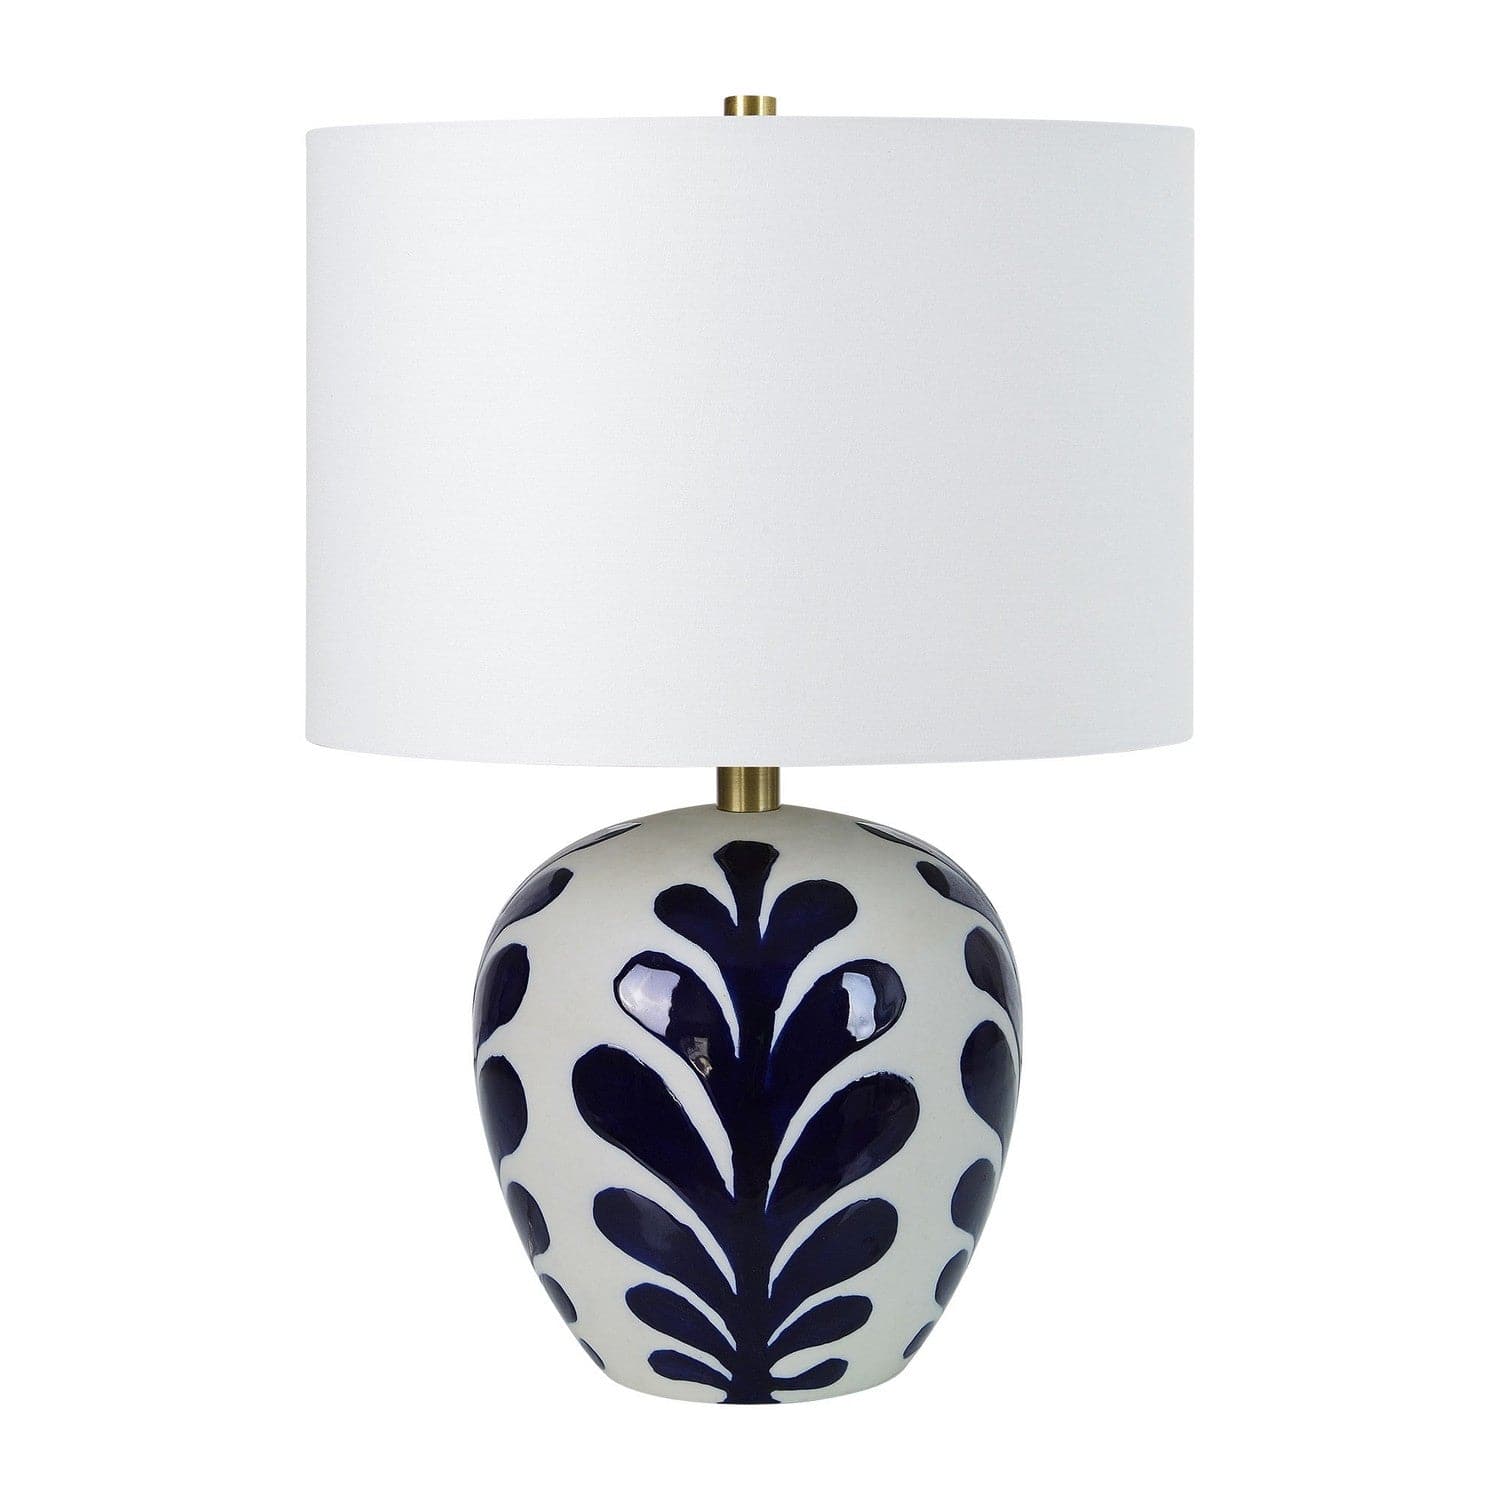 Renwil - LPT1224 - One Light Table Lamp - Darina - Off-White & Navy